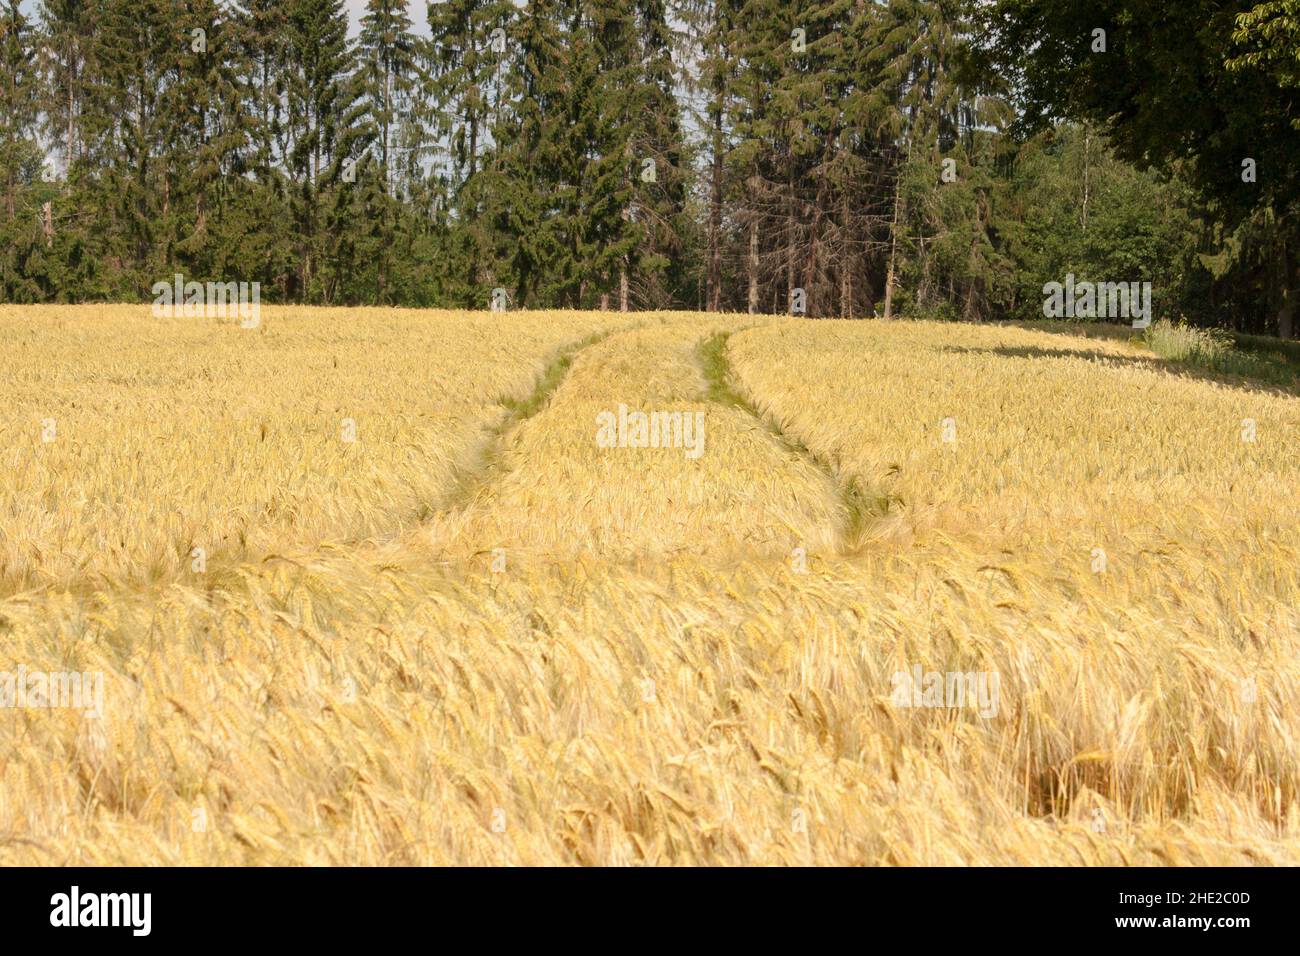 a ripe grian field ready to get harvested Stock Photo